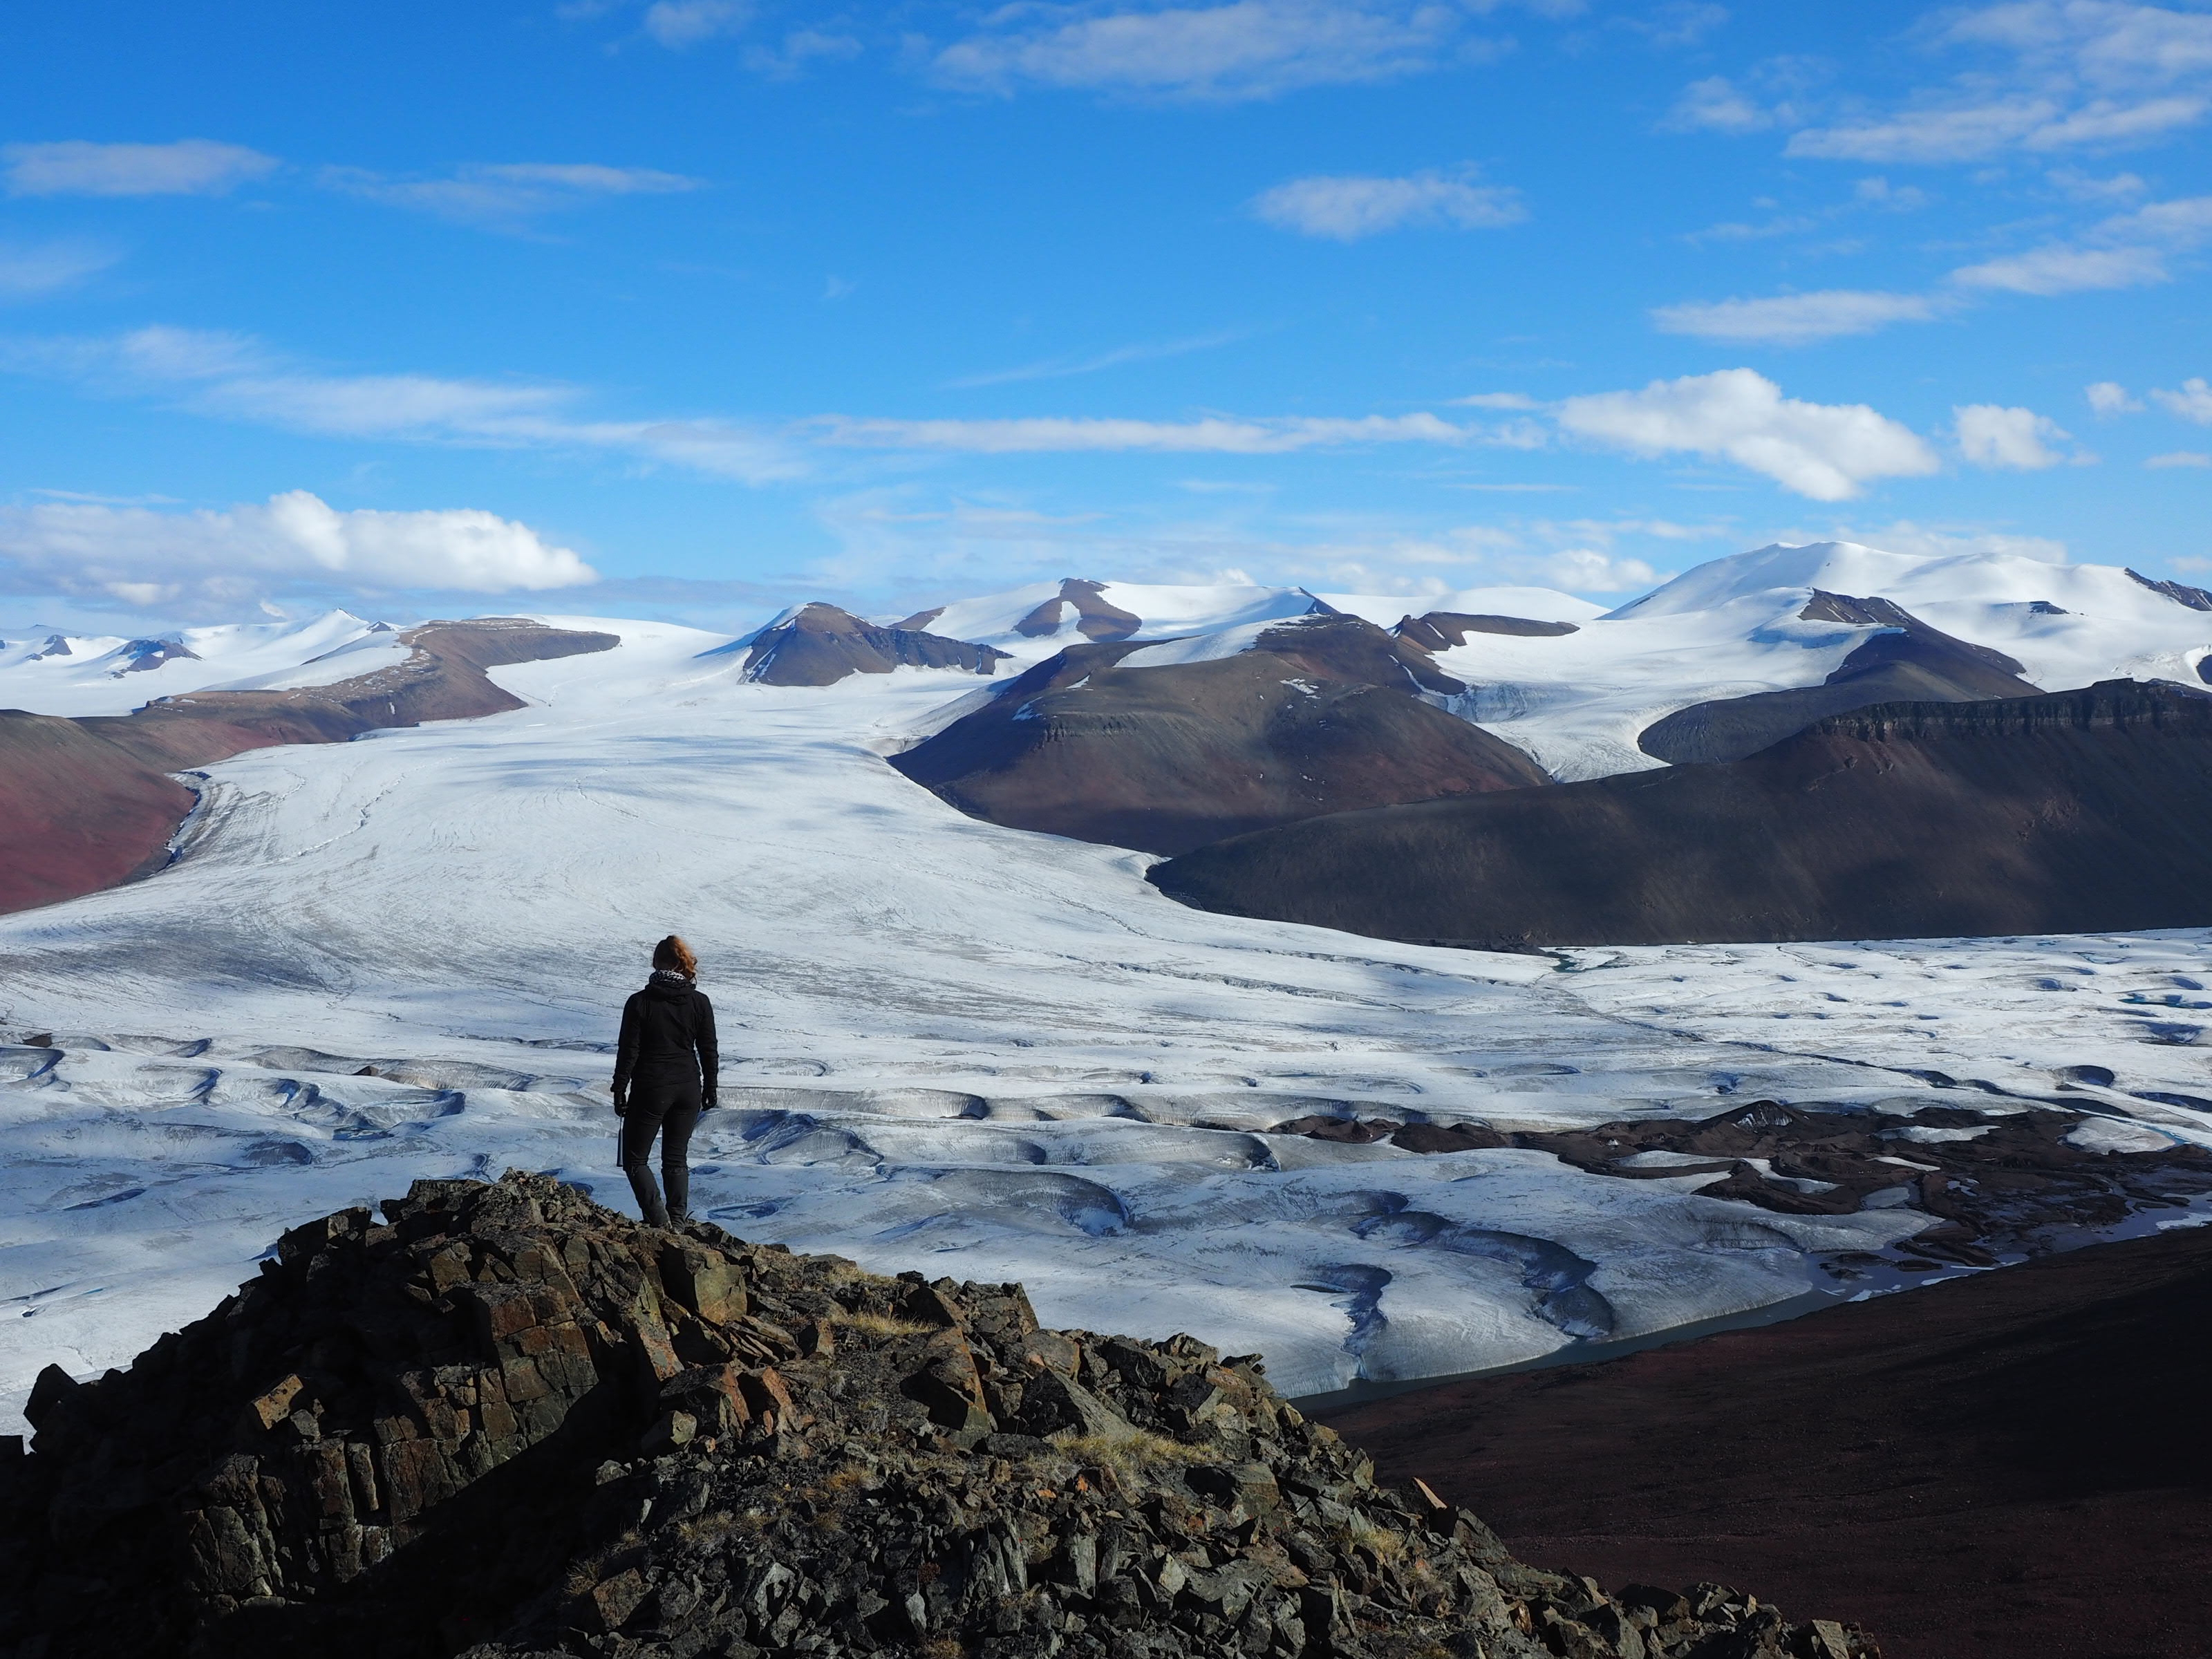 The team travelled as far as the north coast of Ellesmere Island to collect rock samples.